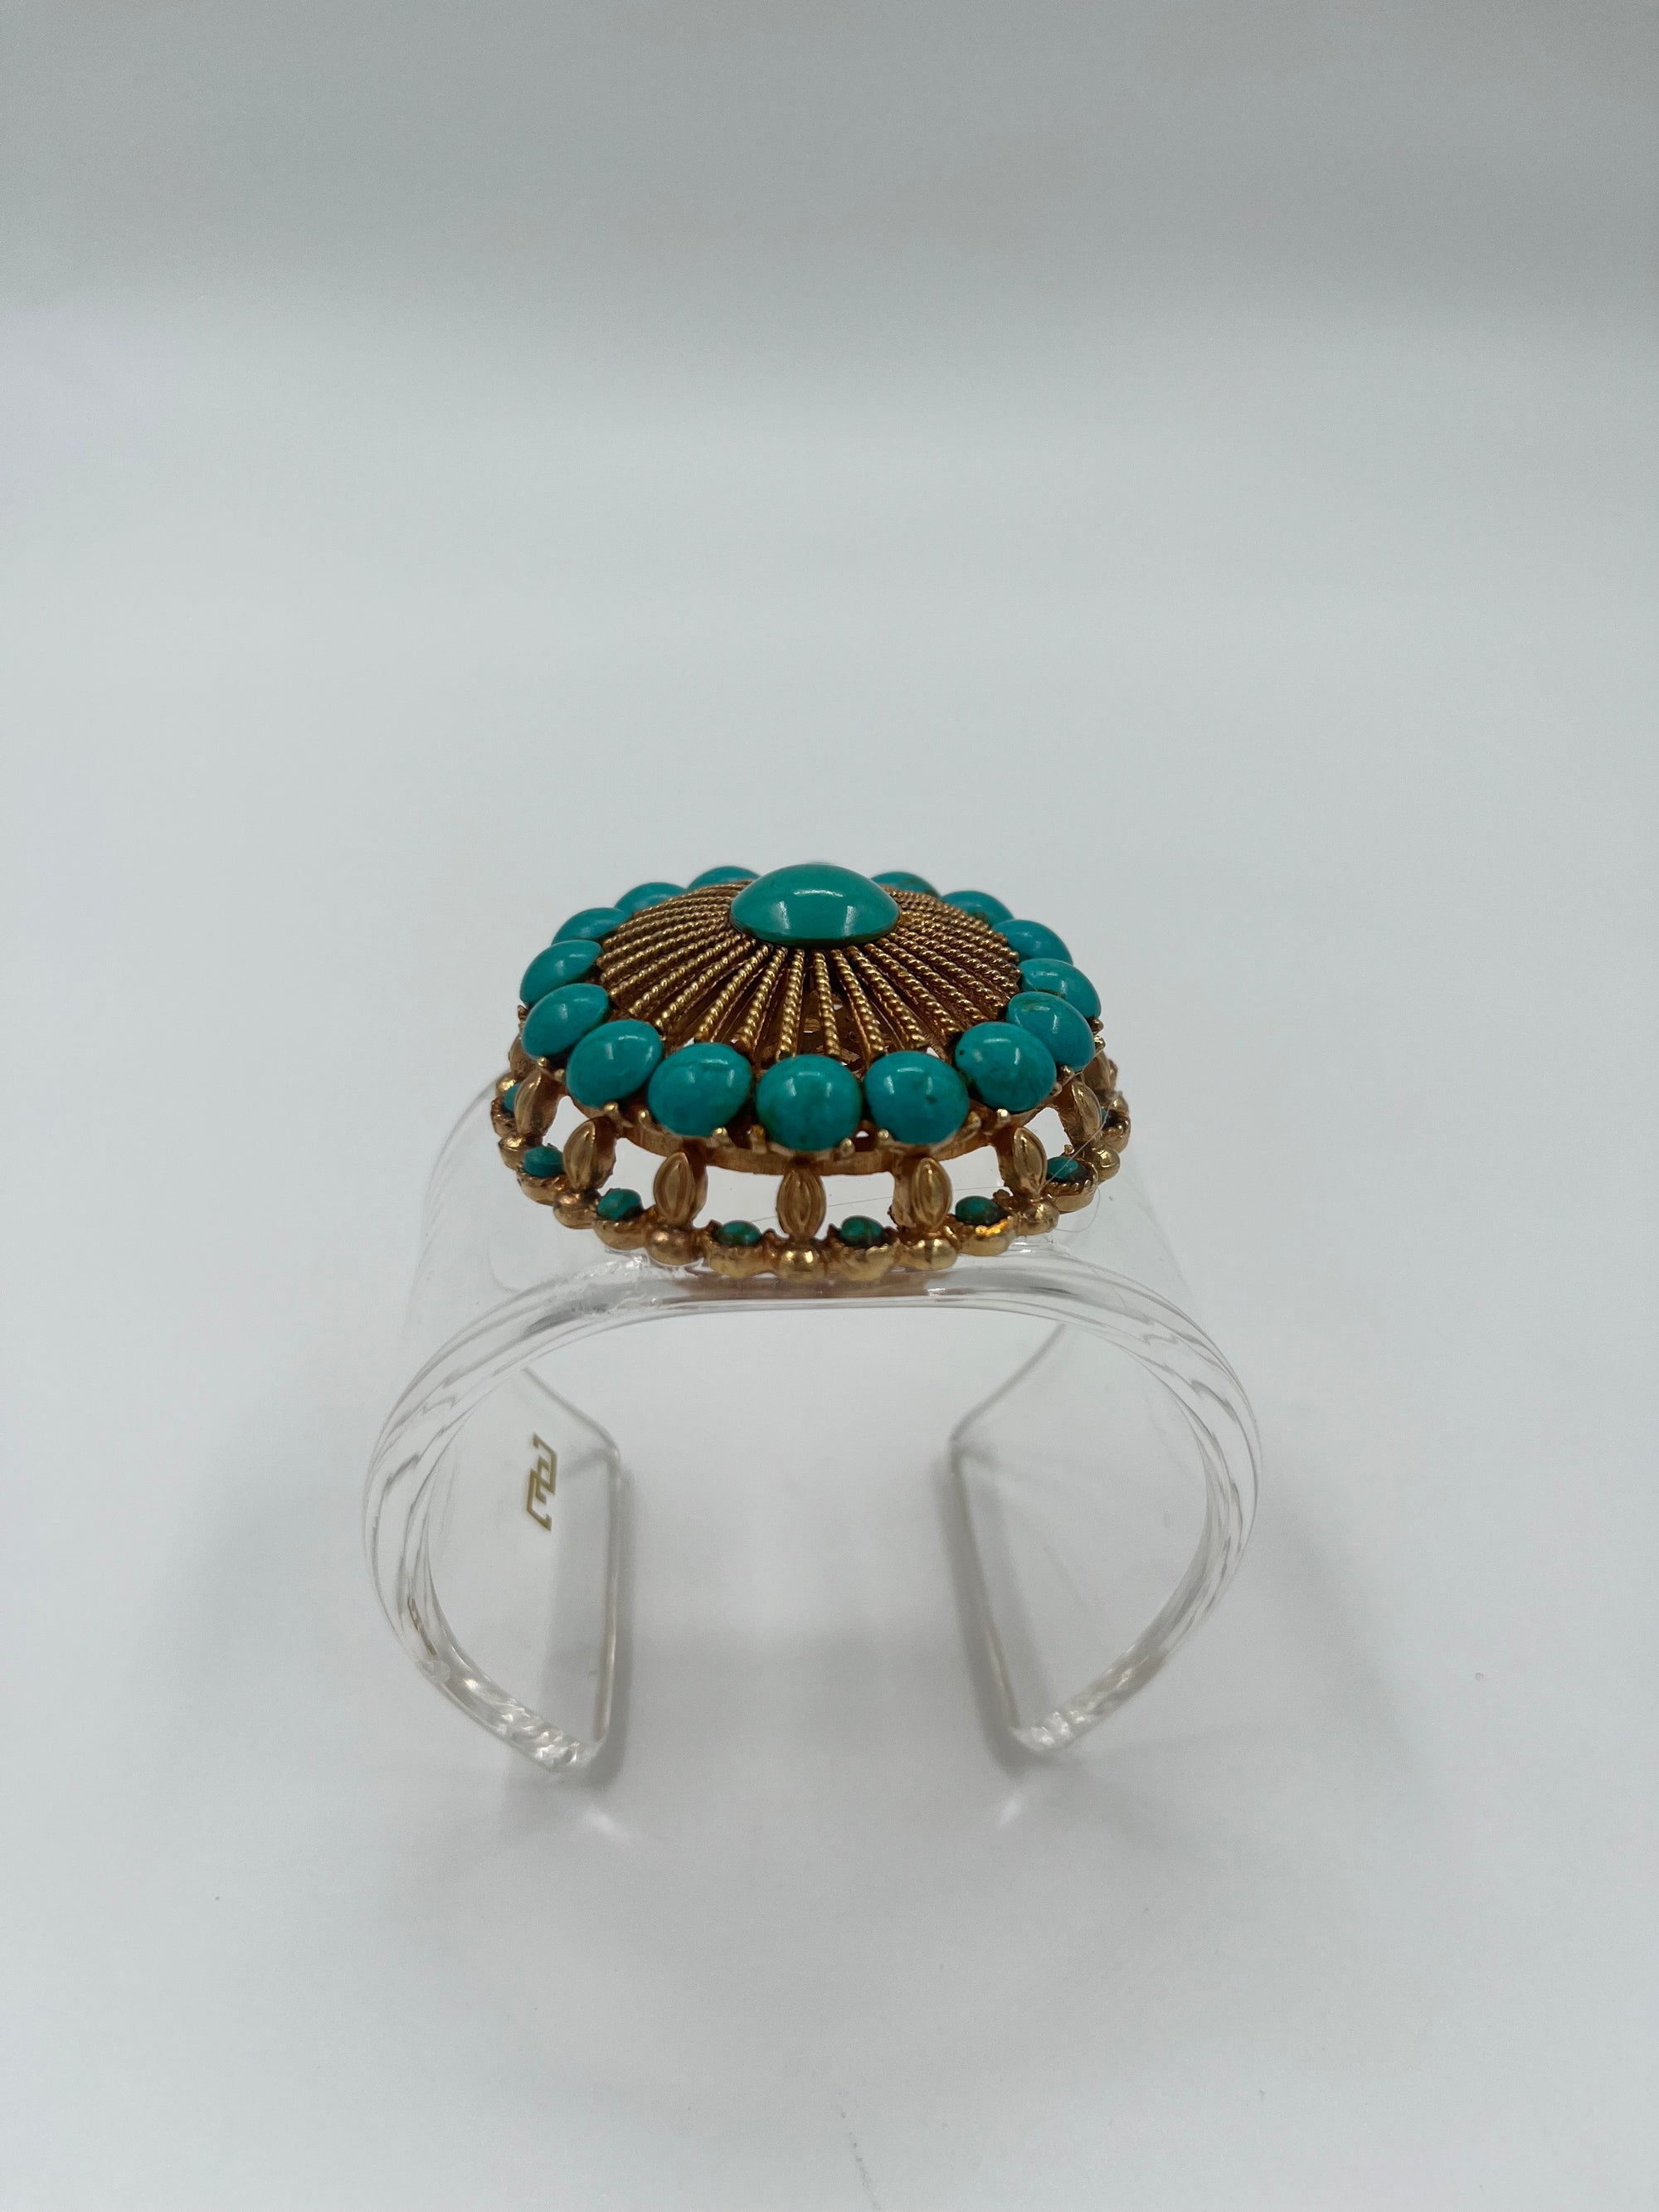 Acrylic Cuff with Vintage Turquoise Brooch